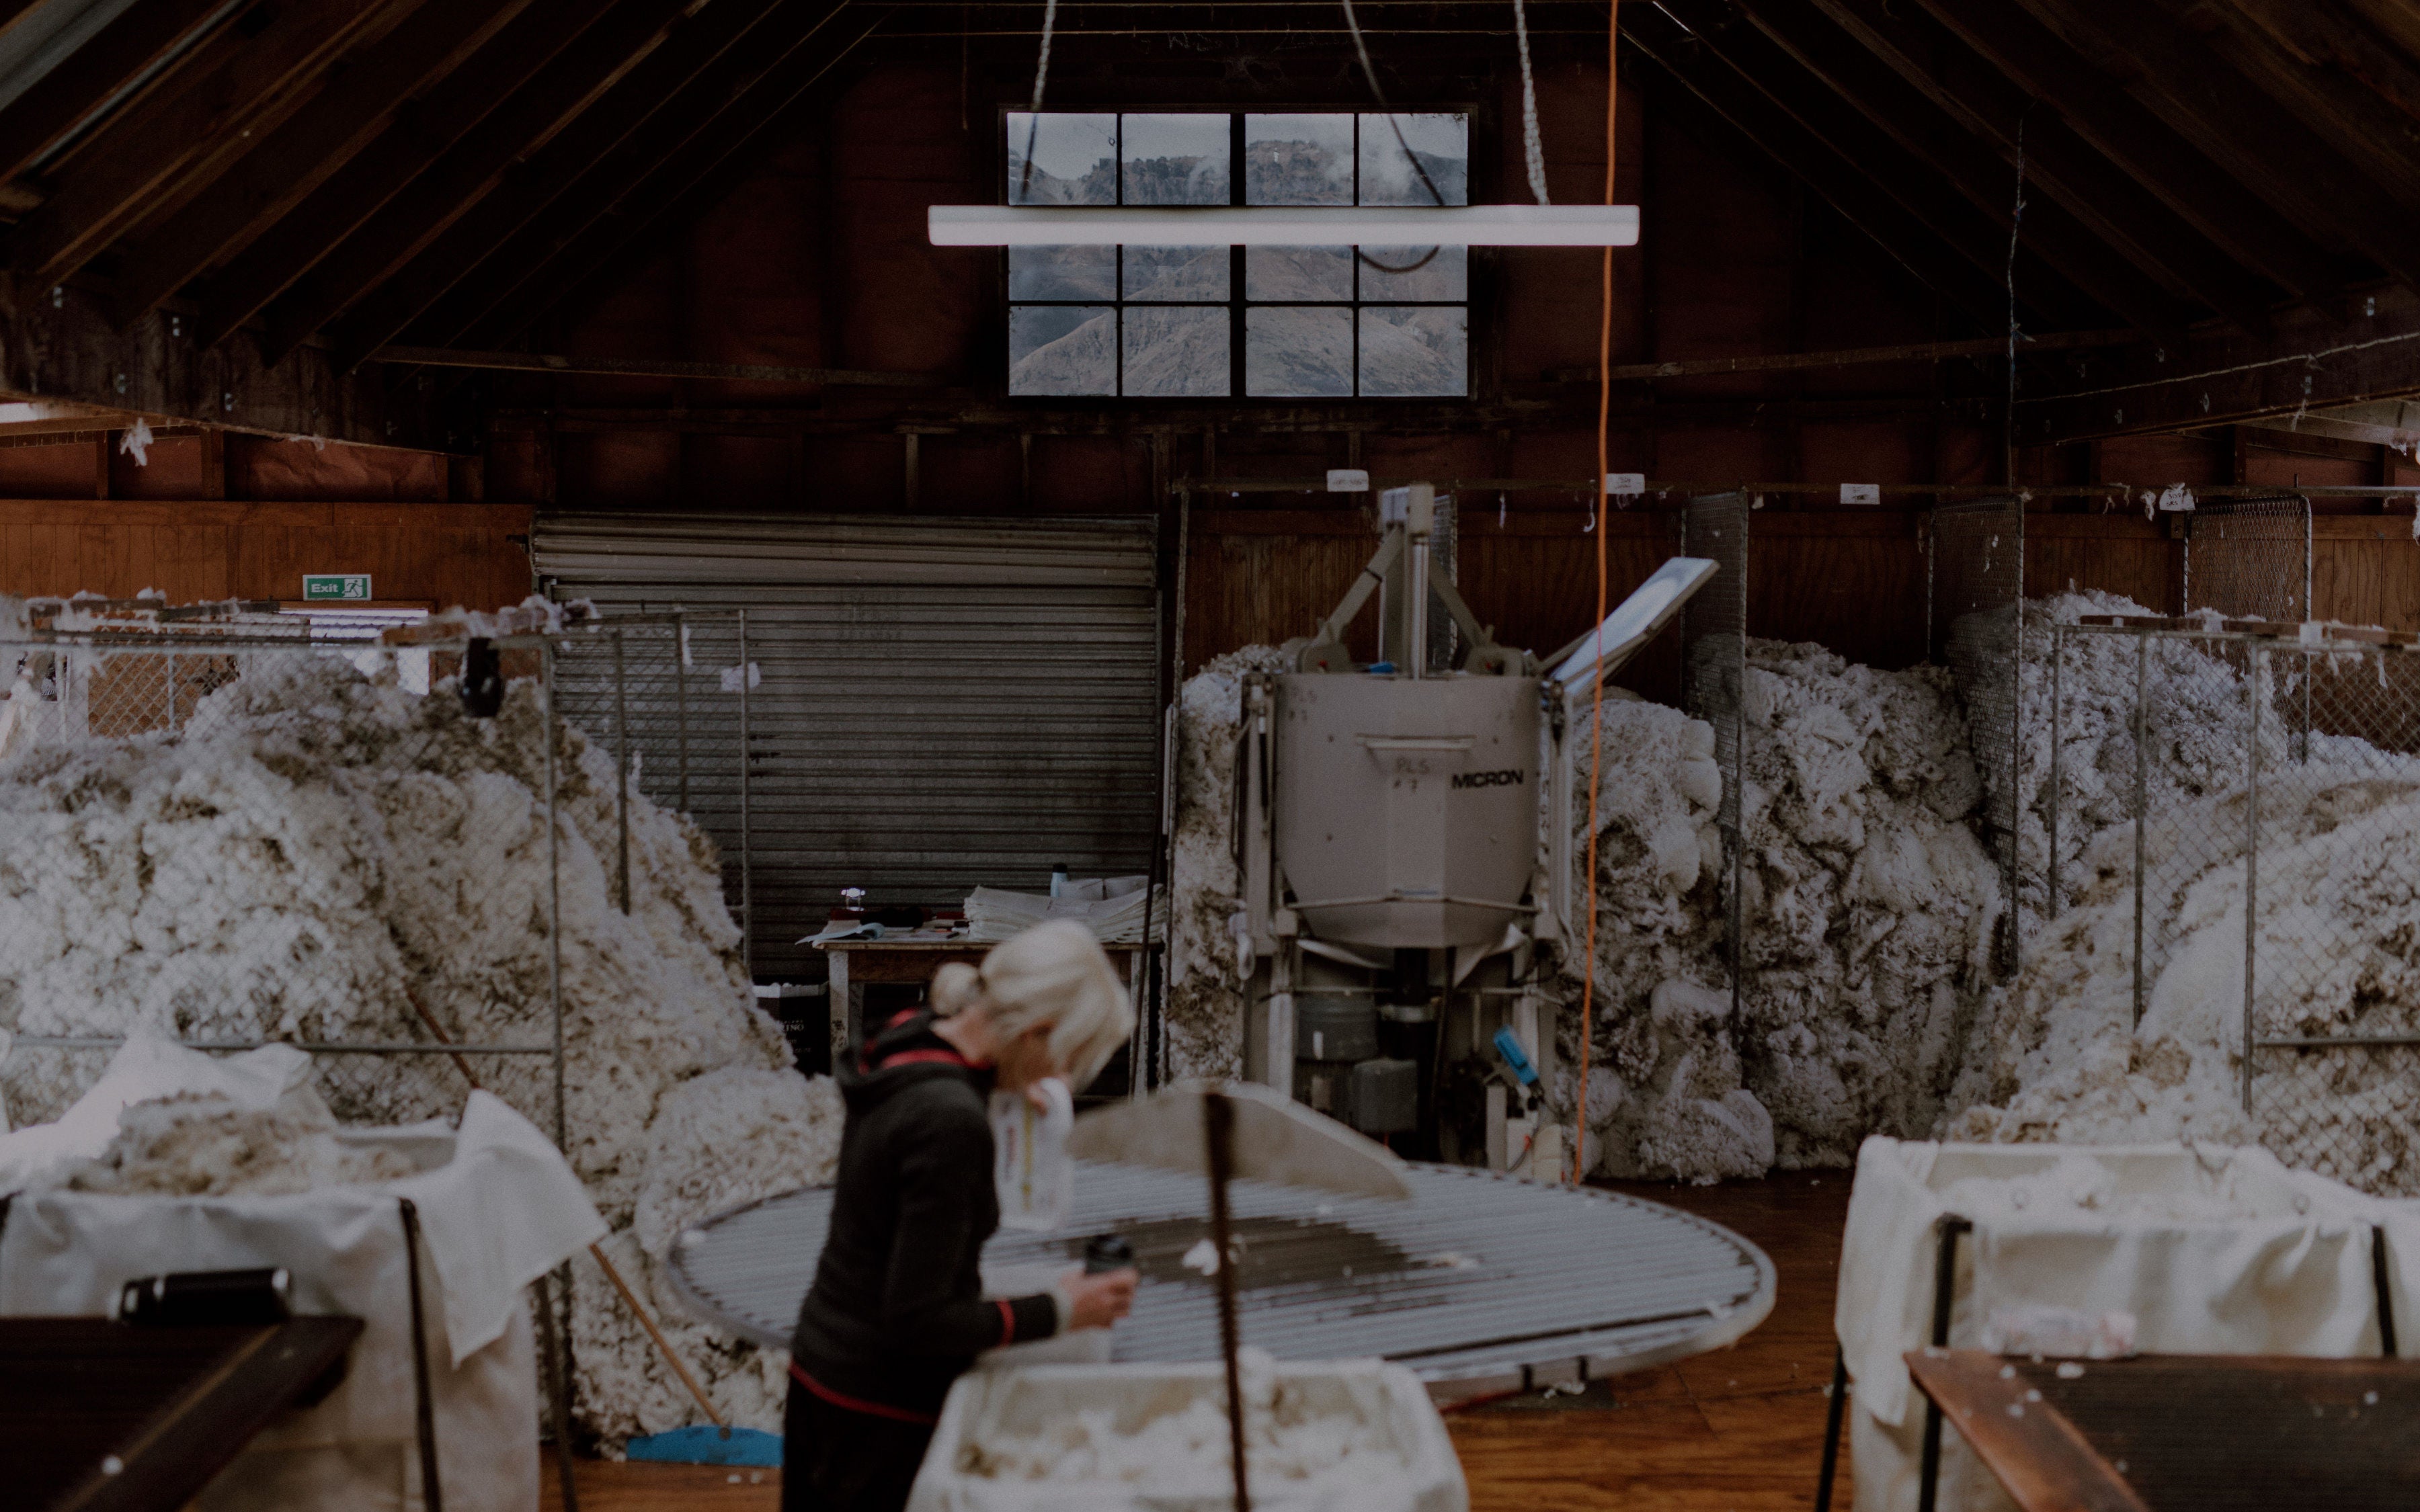 A wool handler sorter and grading the merino wool in the woodshed at Mount Nicholas Station.